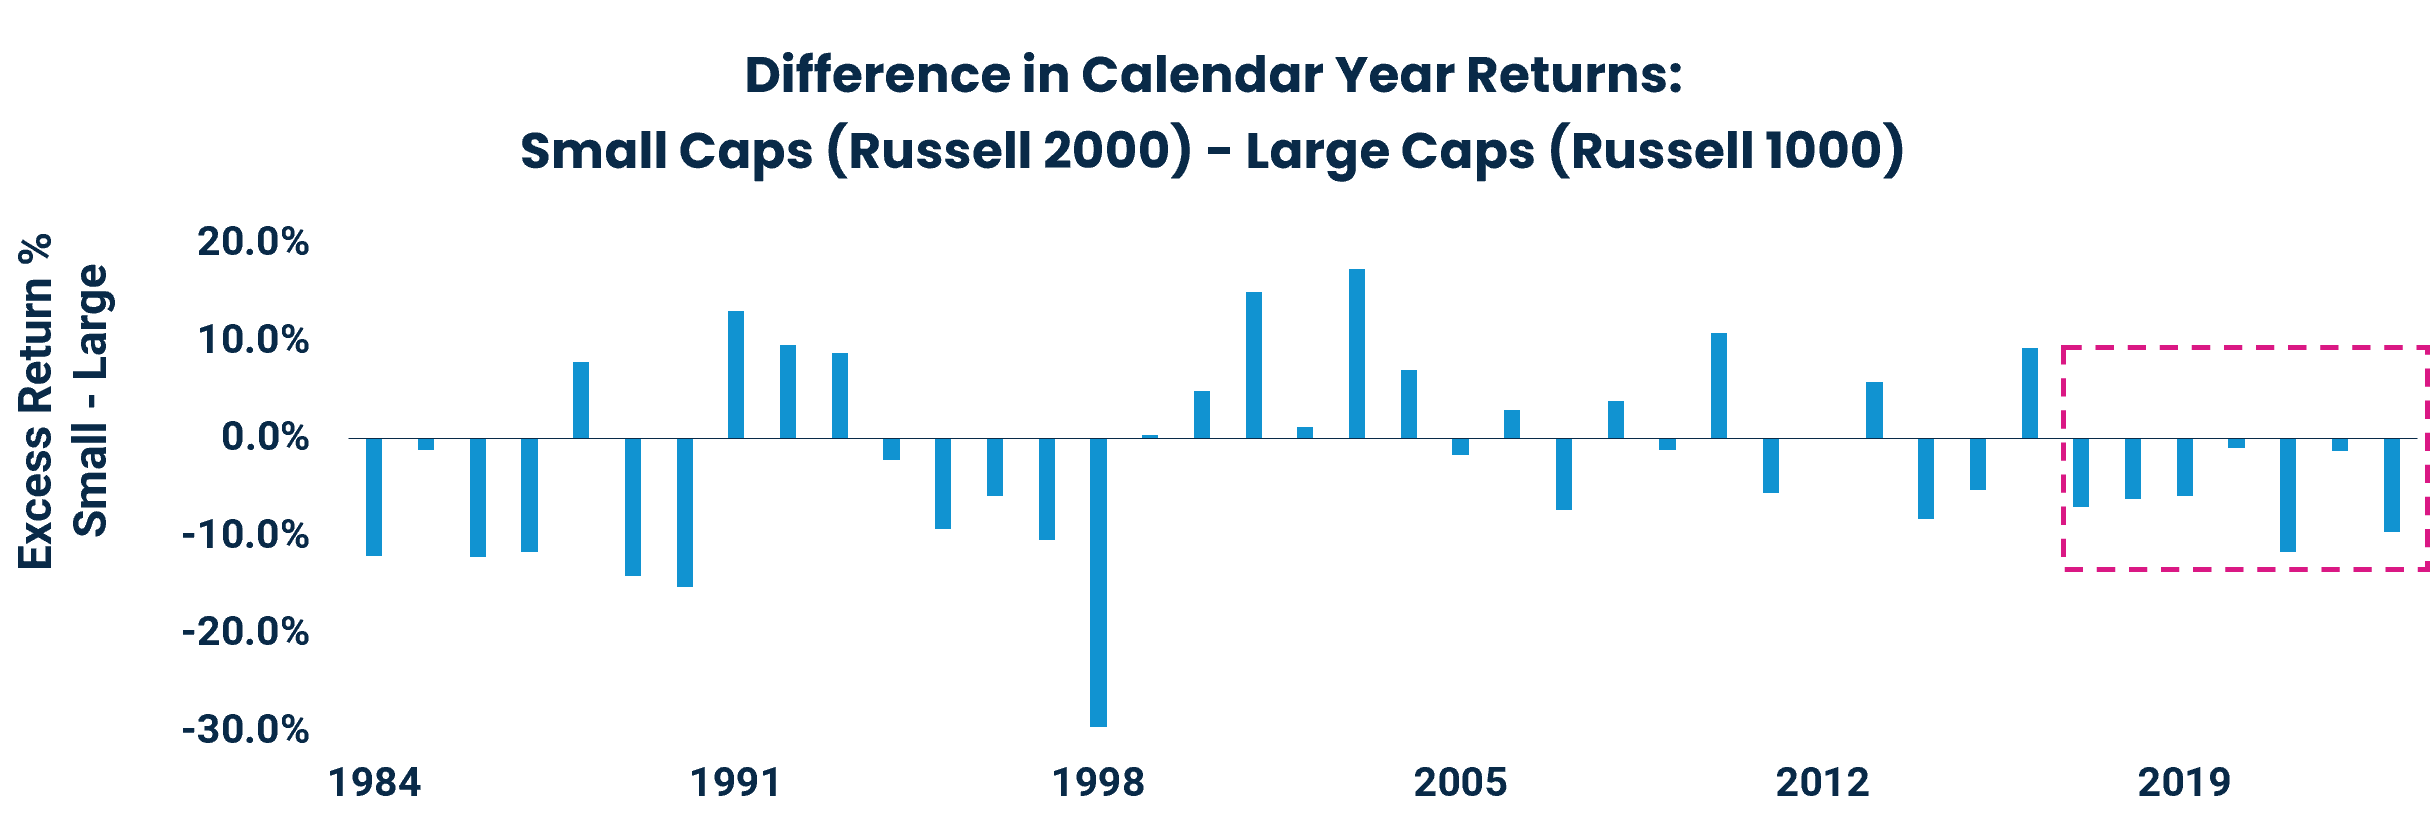 Difference in Calendar Year Returns: Small Caps (Russell 2000) - Large Caps (Russell 1000)